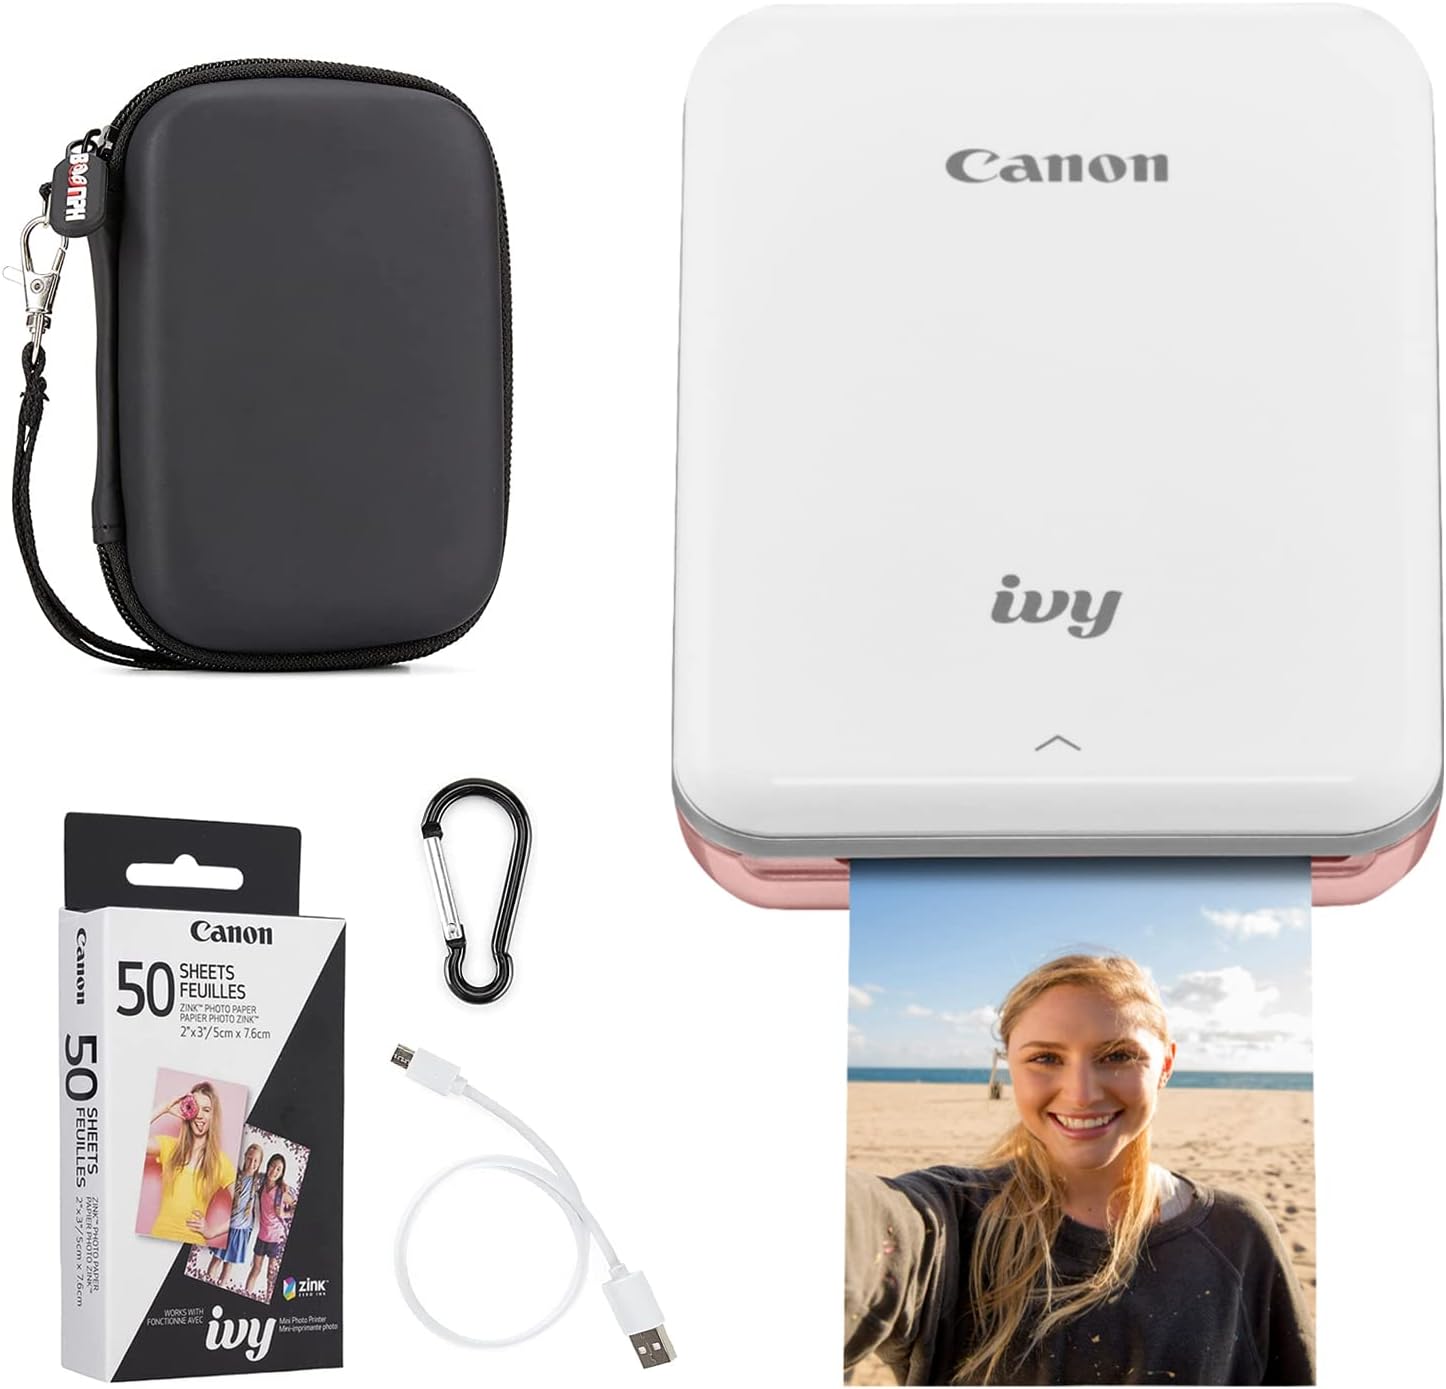 Canon IVY Mini Printer + 60 Sheets of ZINK Photo Paper [...]